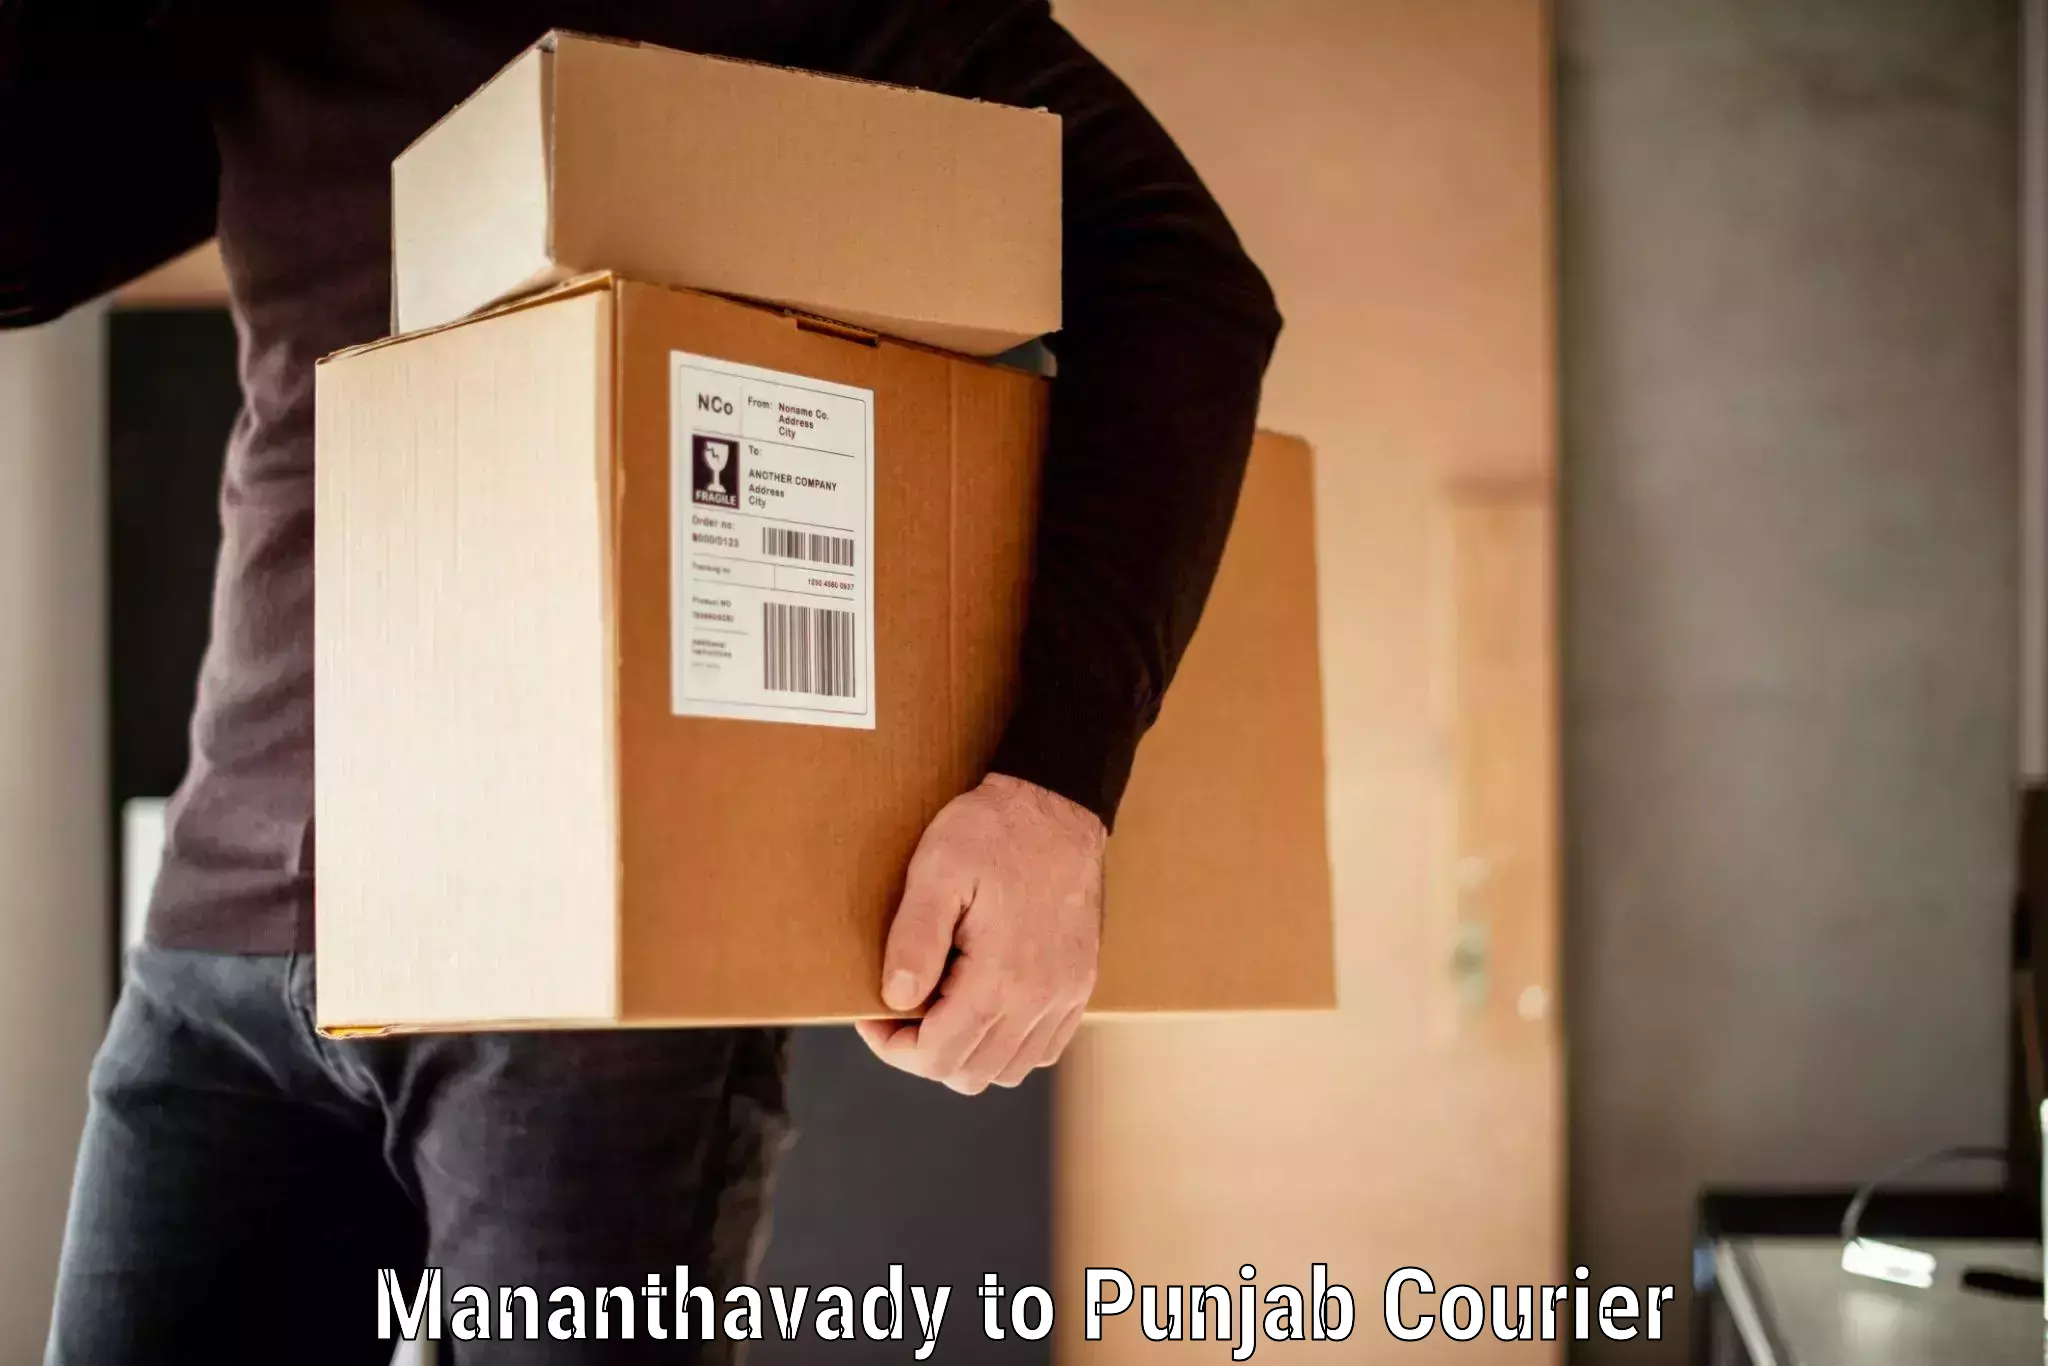 Luggage delivery app Mananthavady to Dhilwan